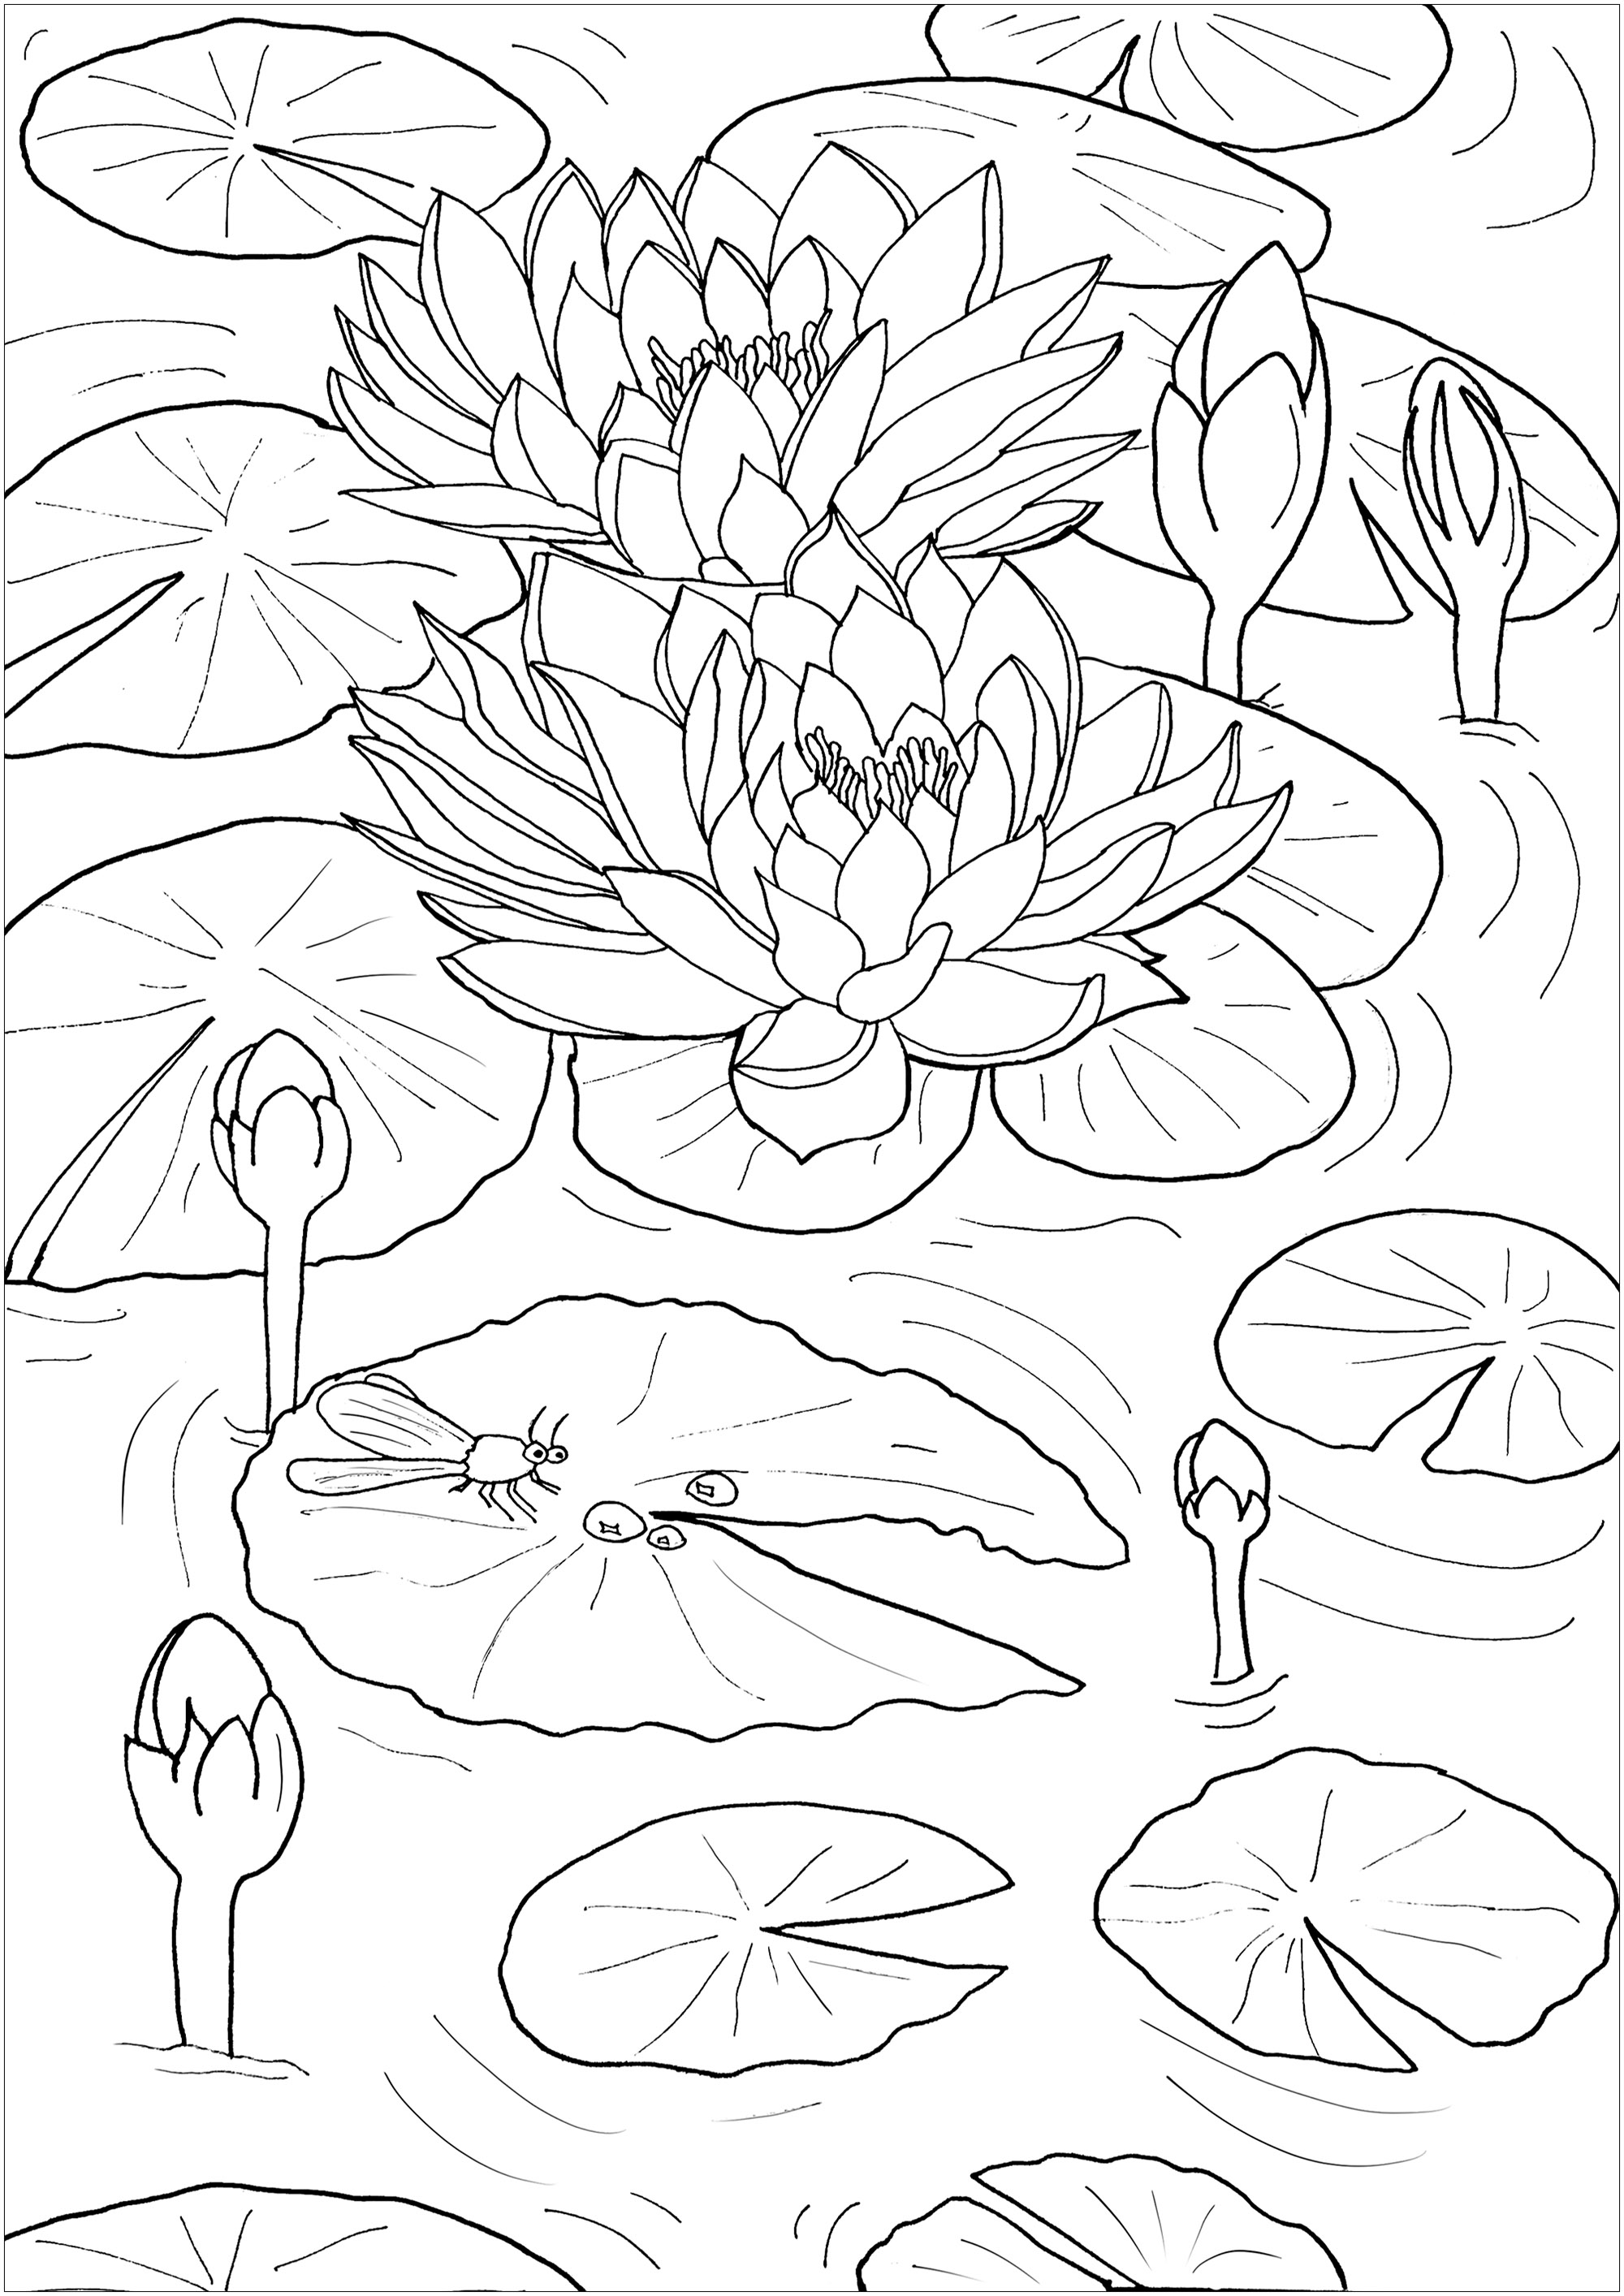 Coloring Pages for Watercolor